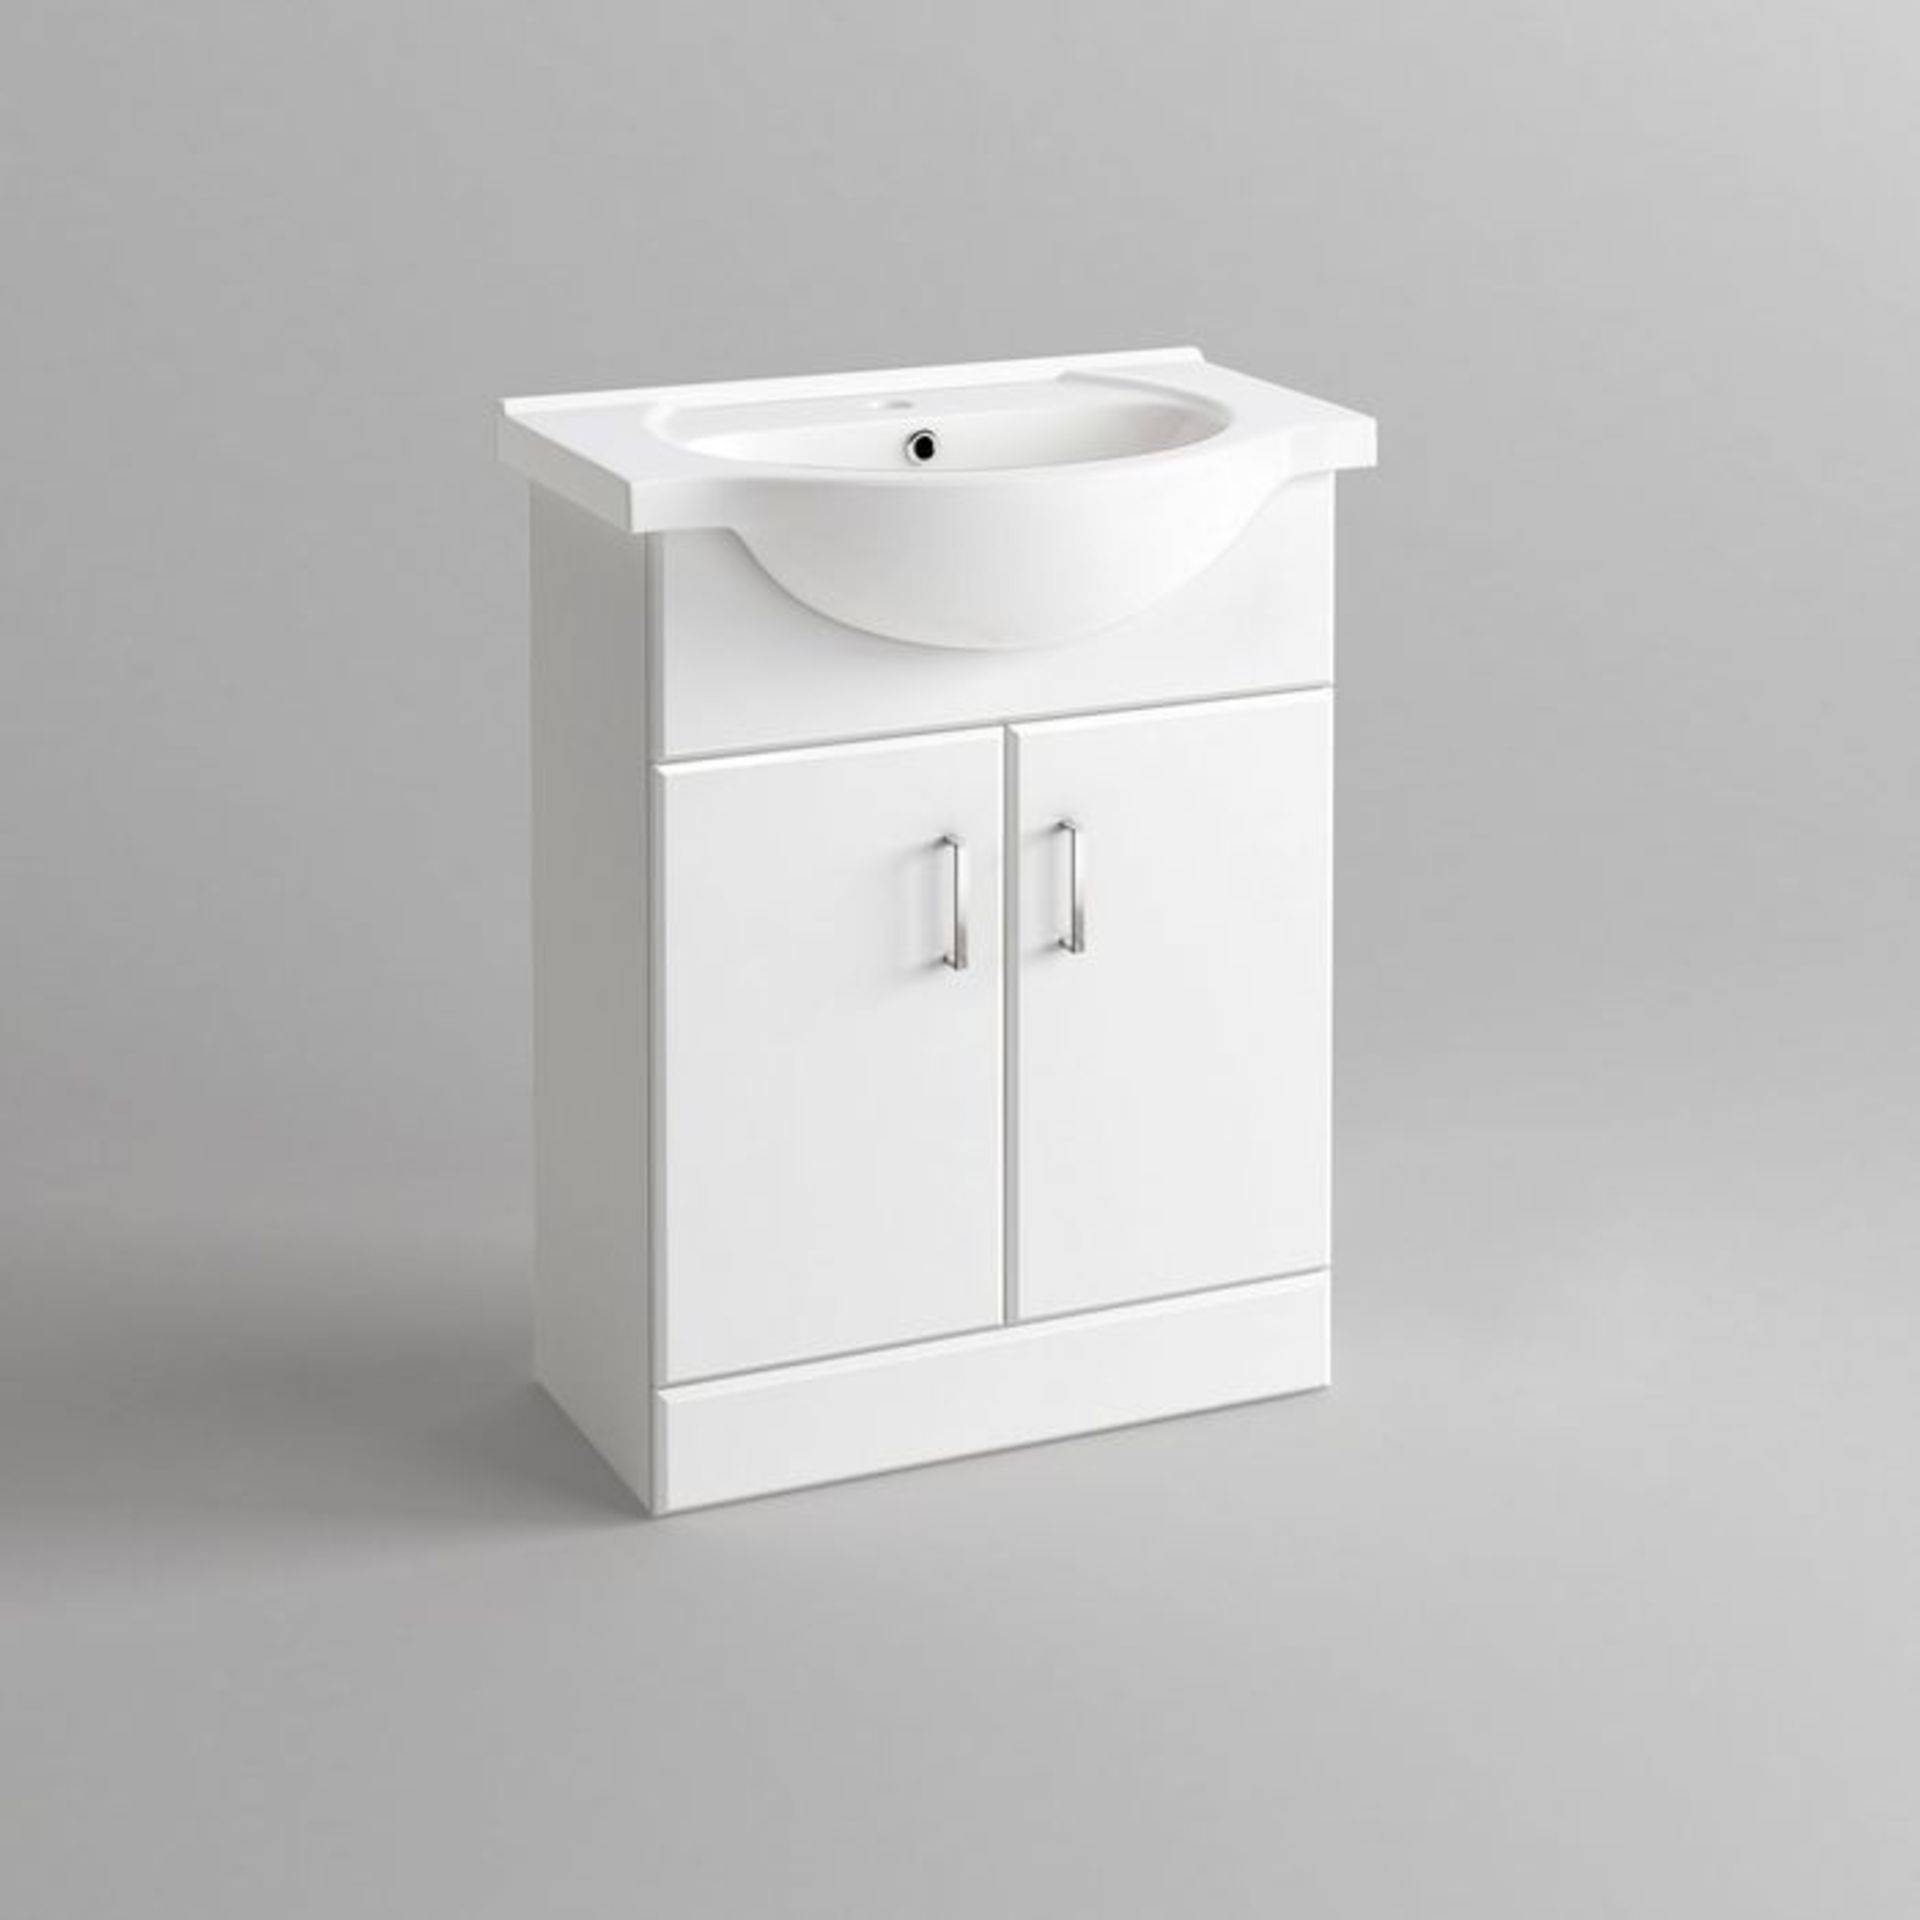 (Q93) 650x435mm Quartz Gloss White Built In Basin Cabinet. RRP £399.99. comes complete with basin. - Image 4 of 5